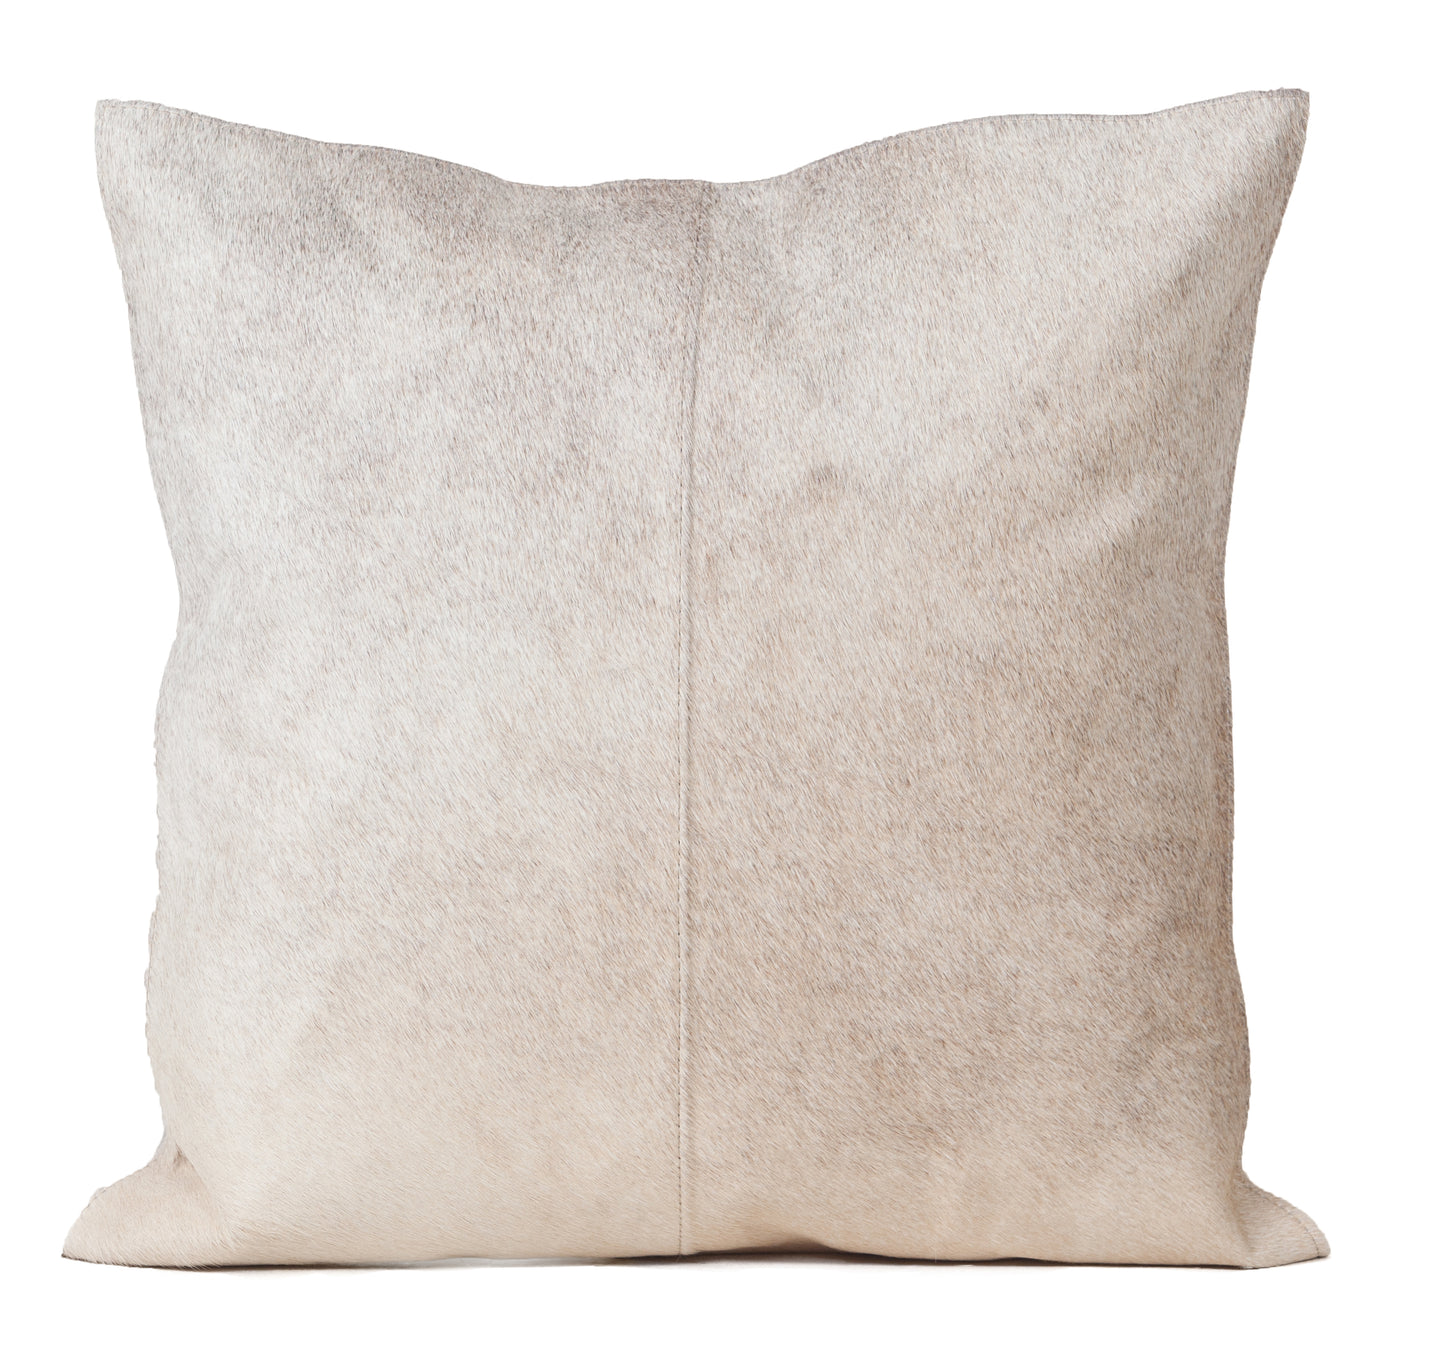 Double Sided Cowhide Cushion